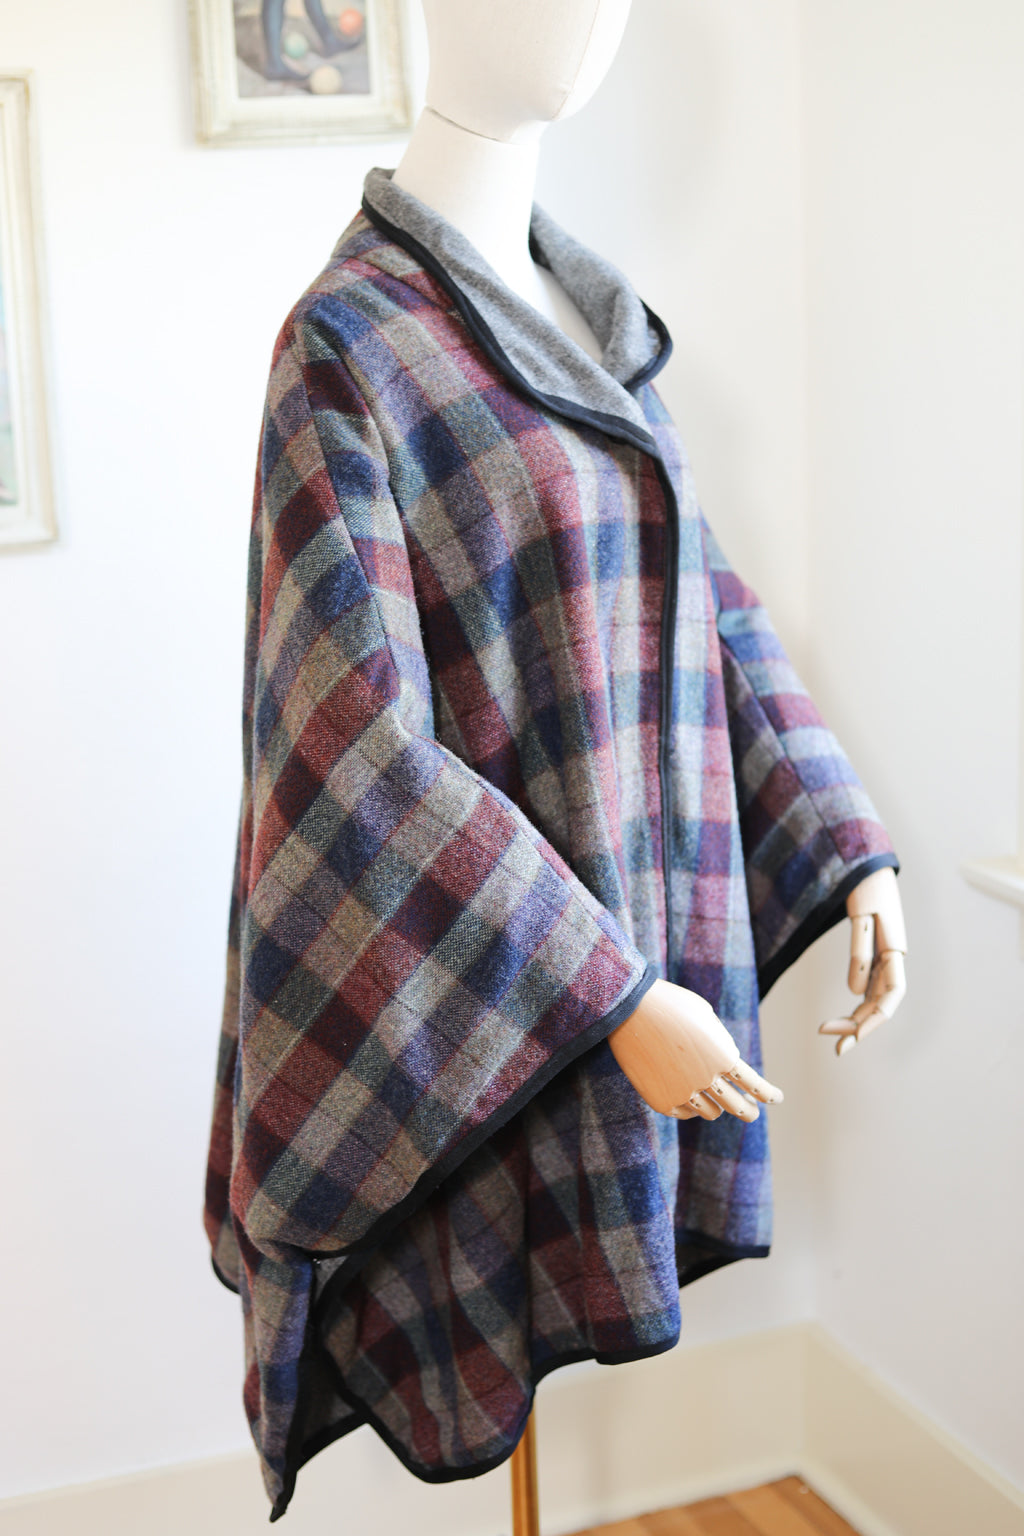 Vintage 1960s Reversible Wool Cape - Cozy Cloak Poncho Reverses from Moody Blue + Plum Plaid to Stormy Grey - Fits Most